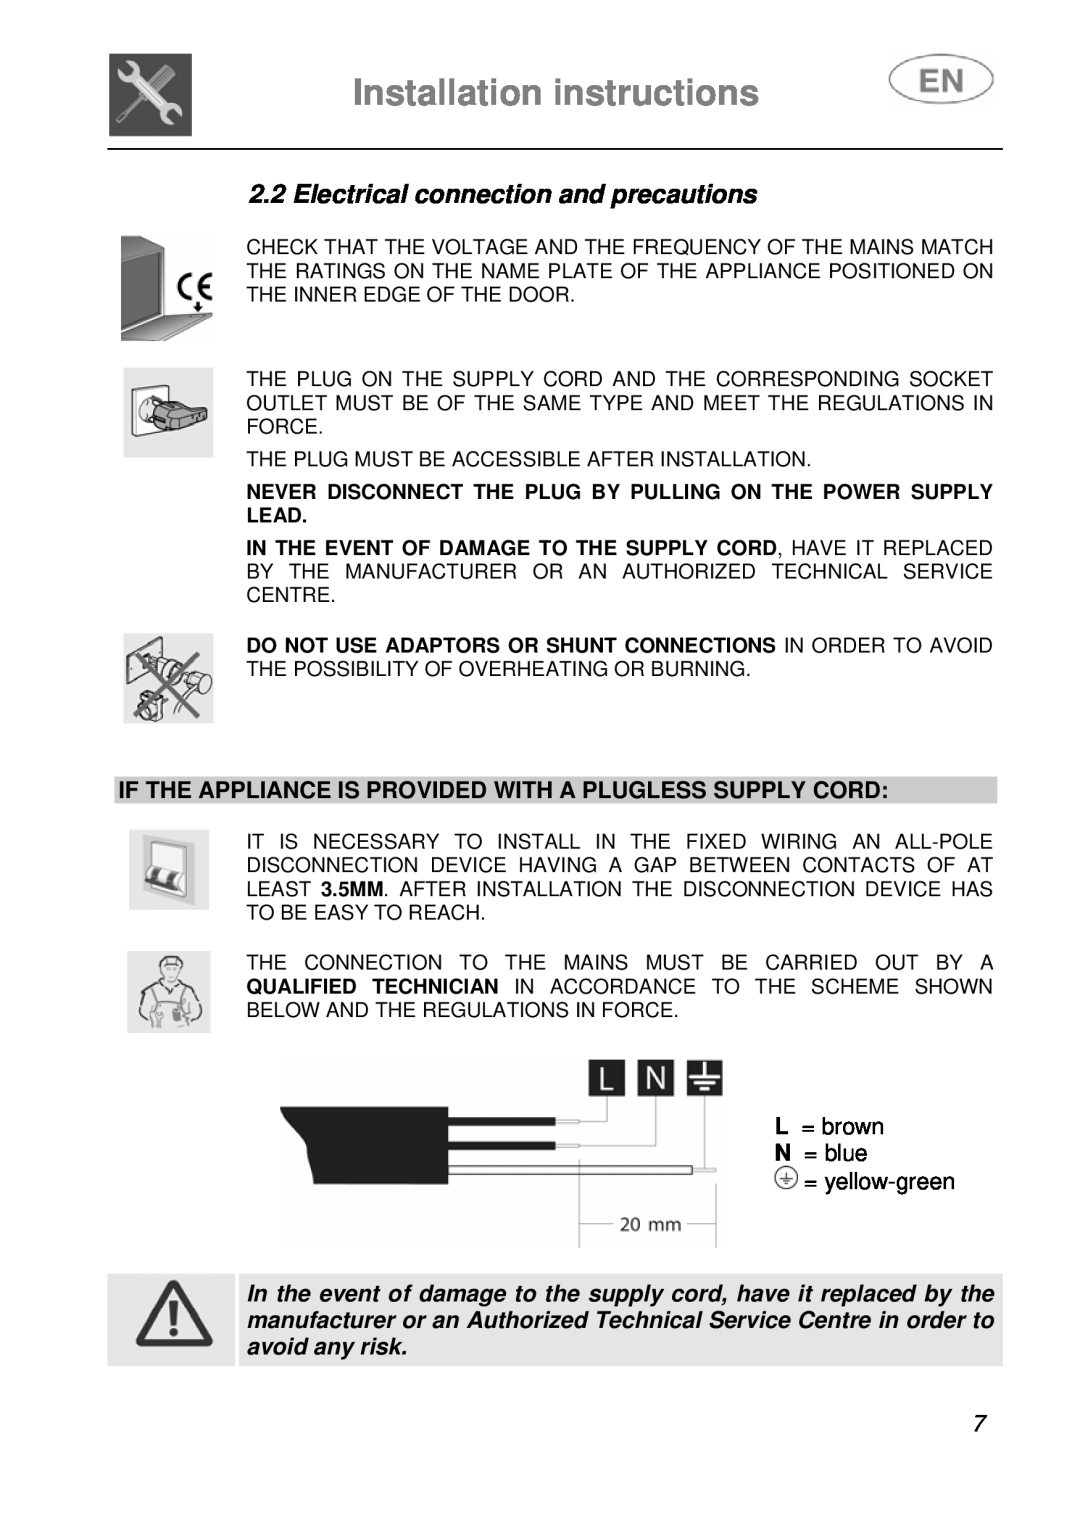 Smeg PL115NE, PL115X instruction manual Installation instructions, Electrical connection and precautions 